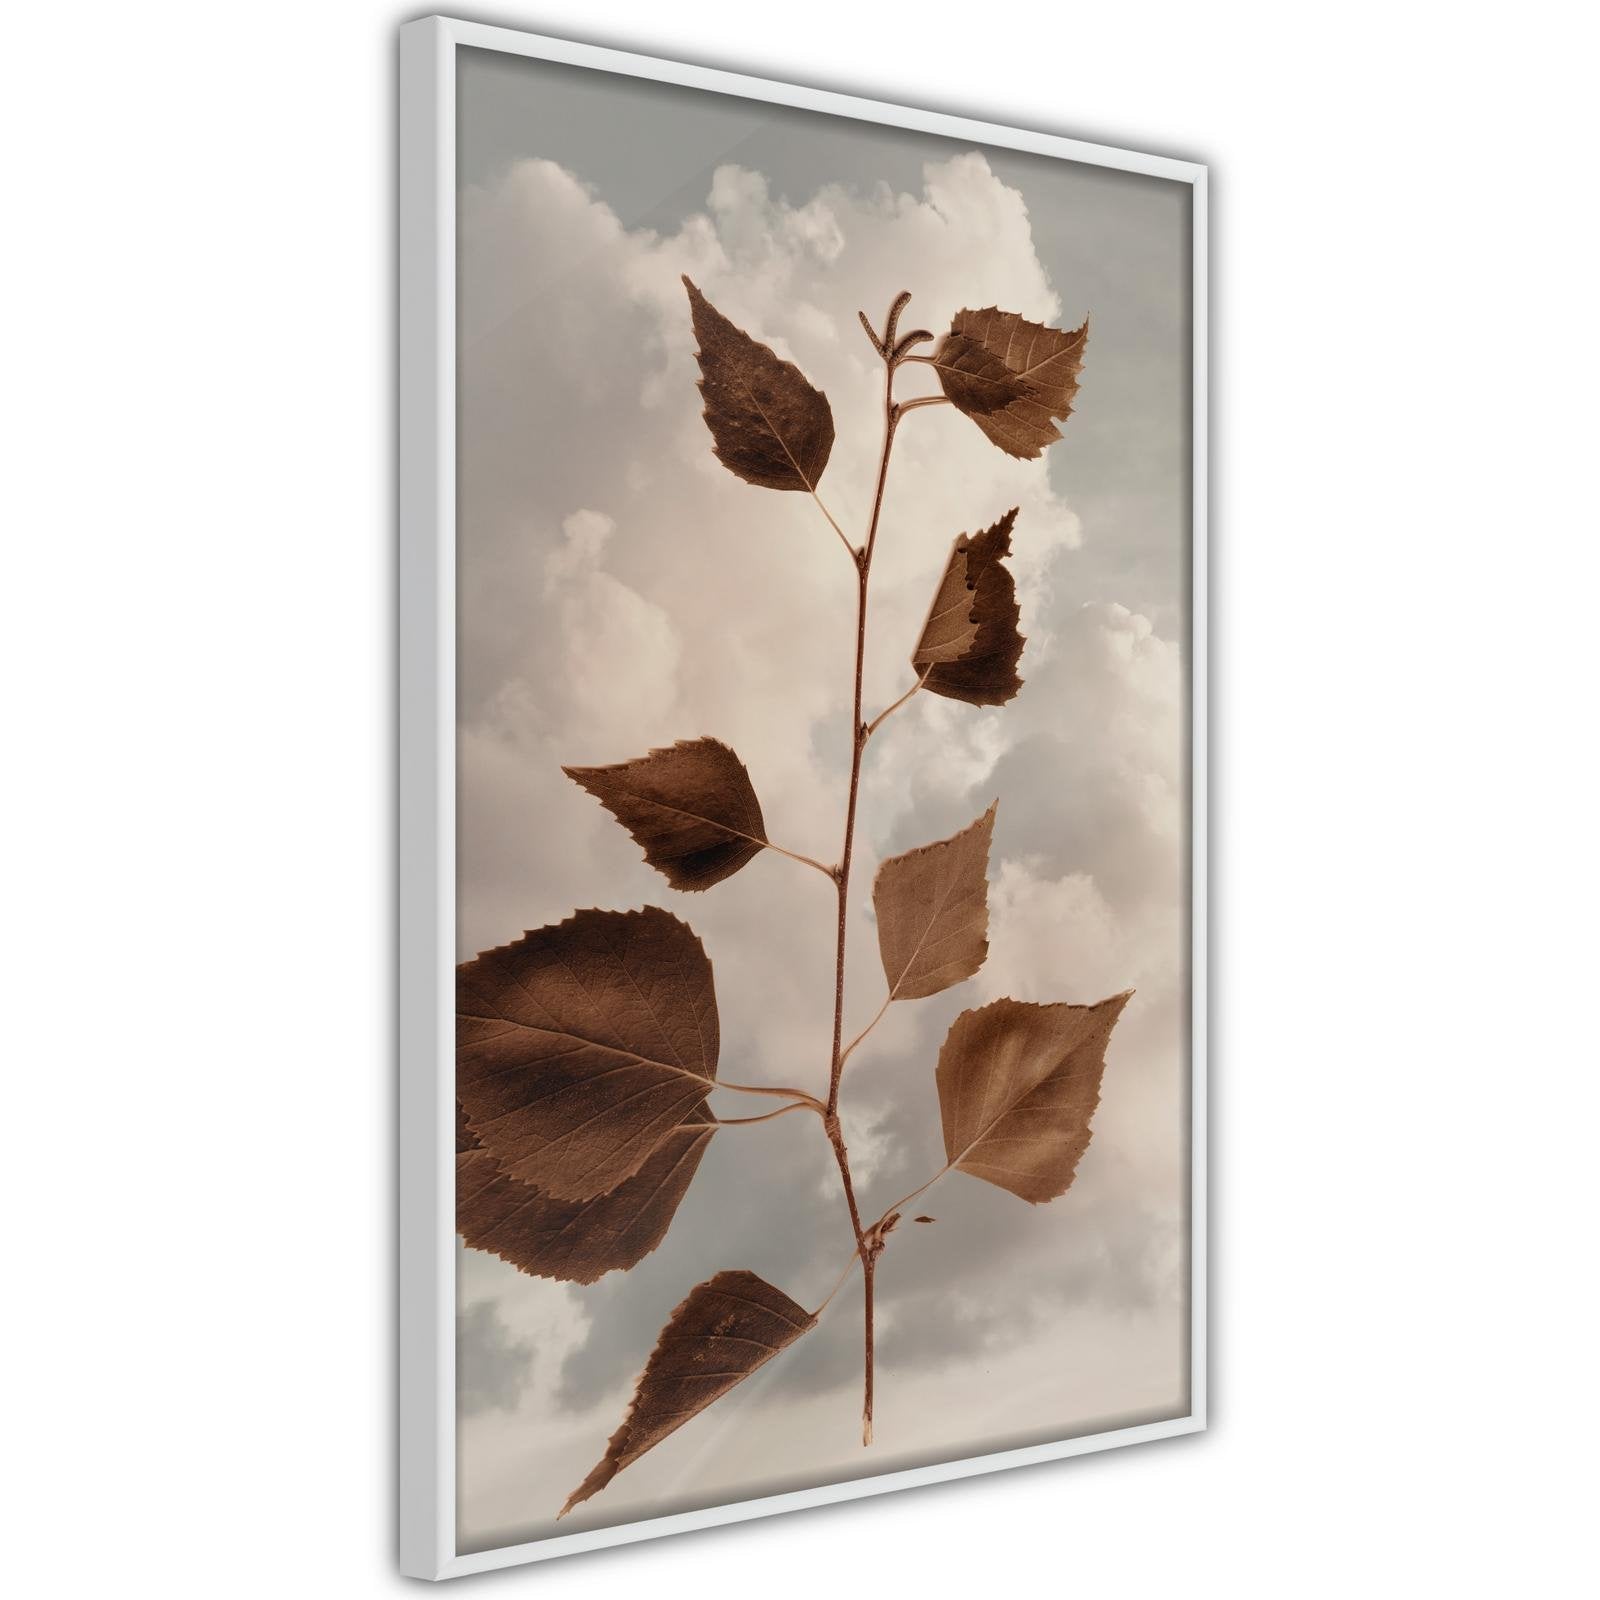 Inramad Poster / Tavla - Leaves in the Clouds-Poster Inramad-Artgeist-peaceofhome.se